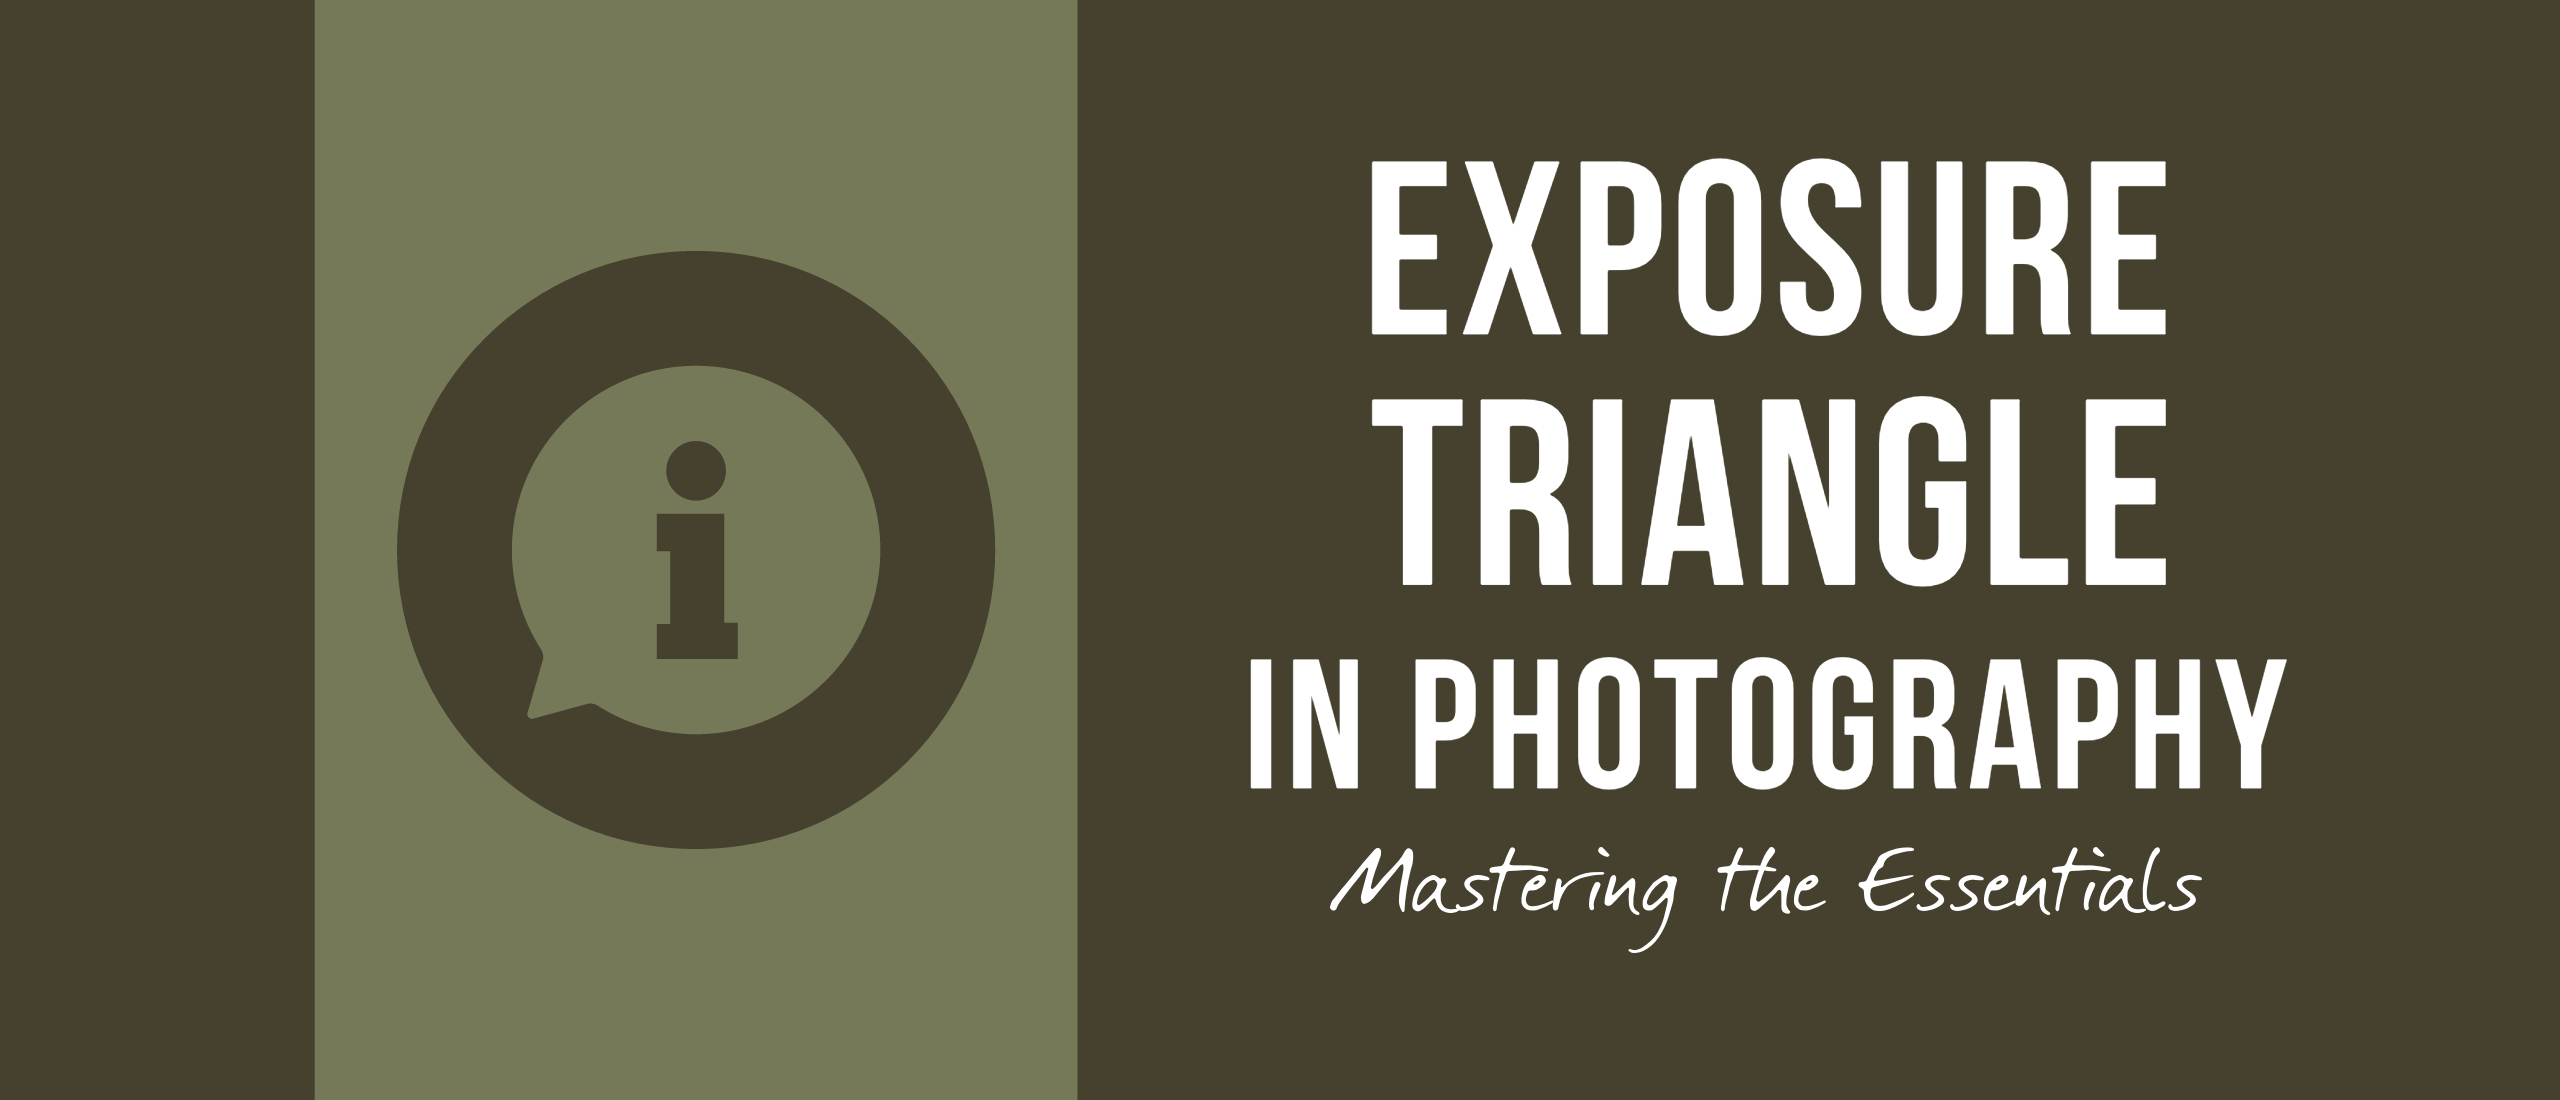 Understanding the Exposure Triangle in Photography